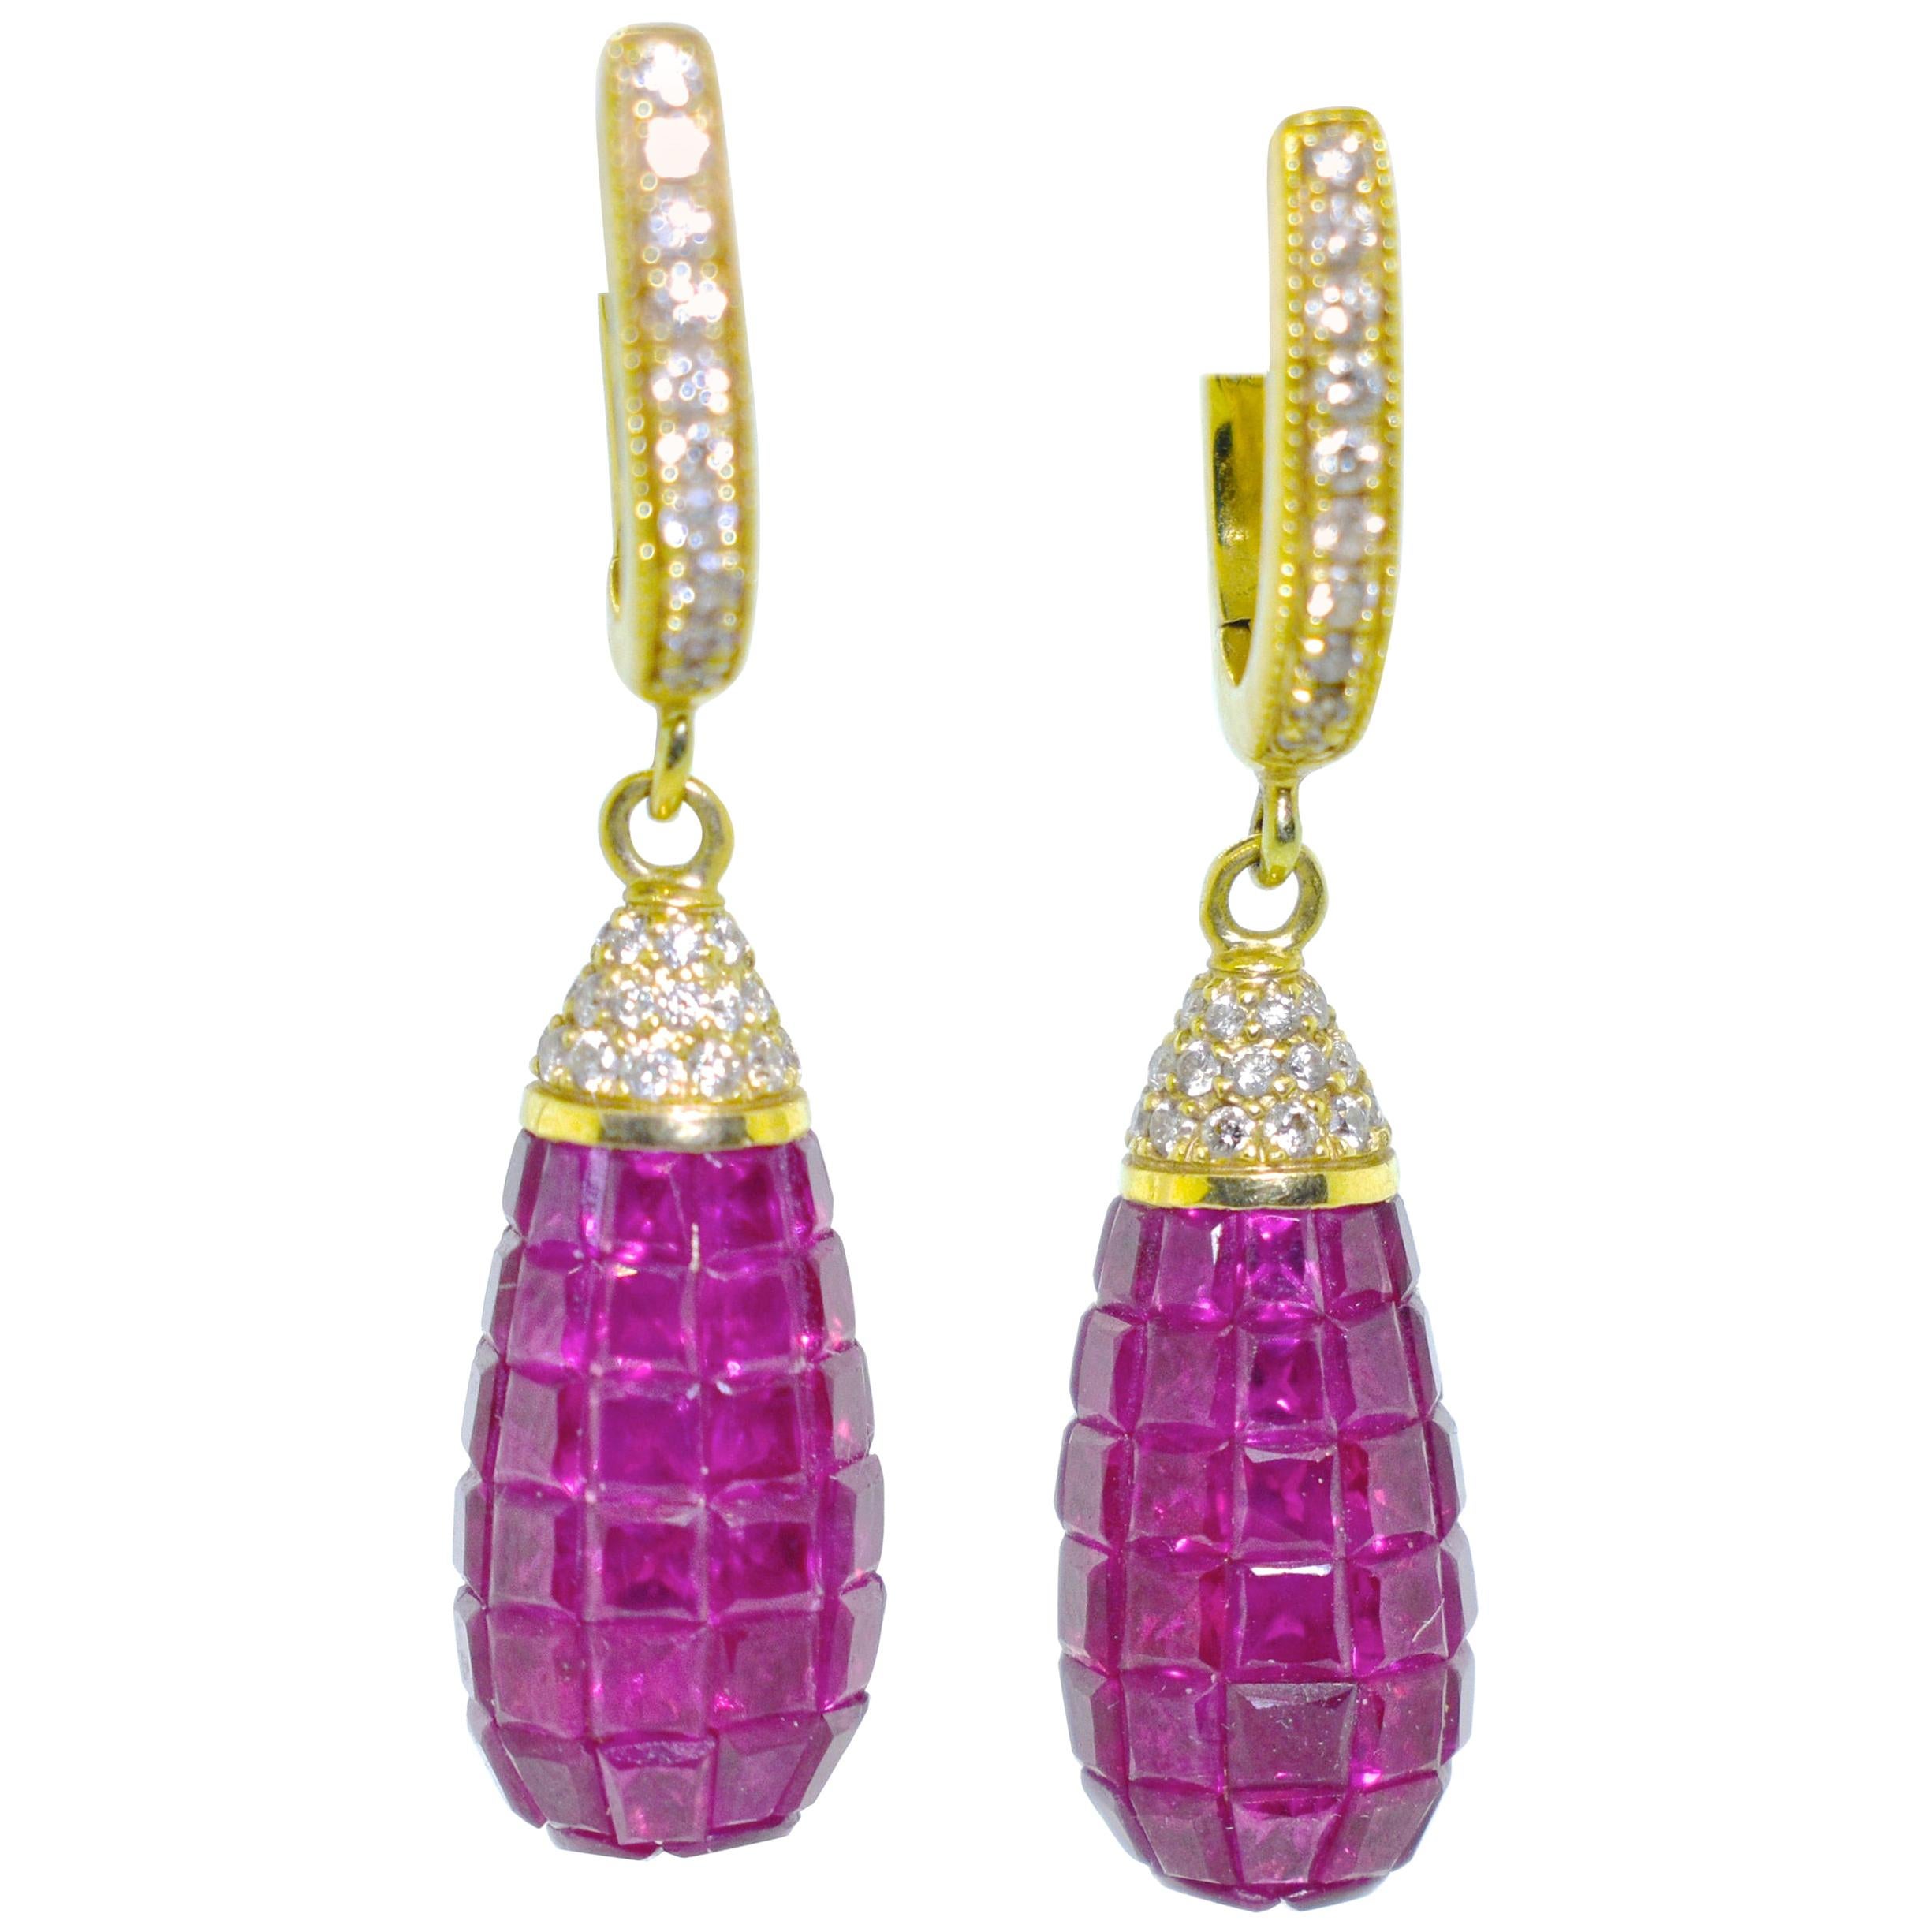 Invisibly Set Natural Fine Rubies and Diamond Earrings